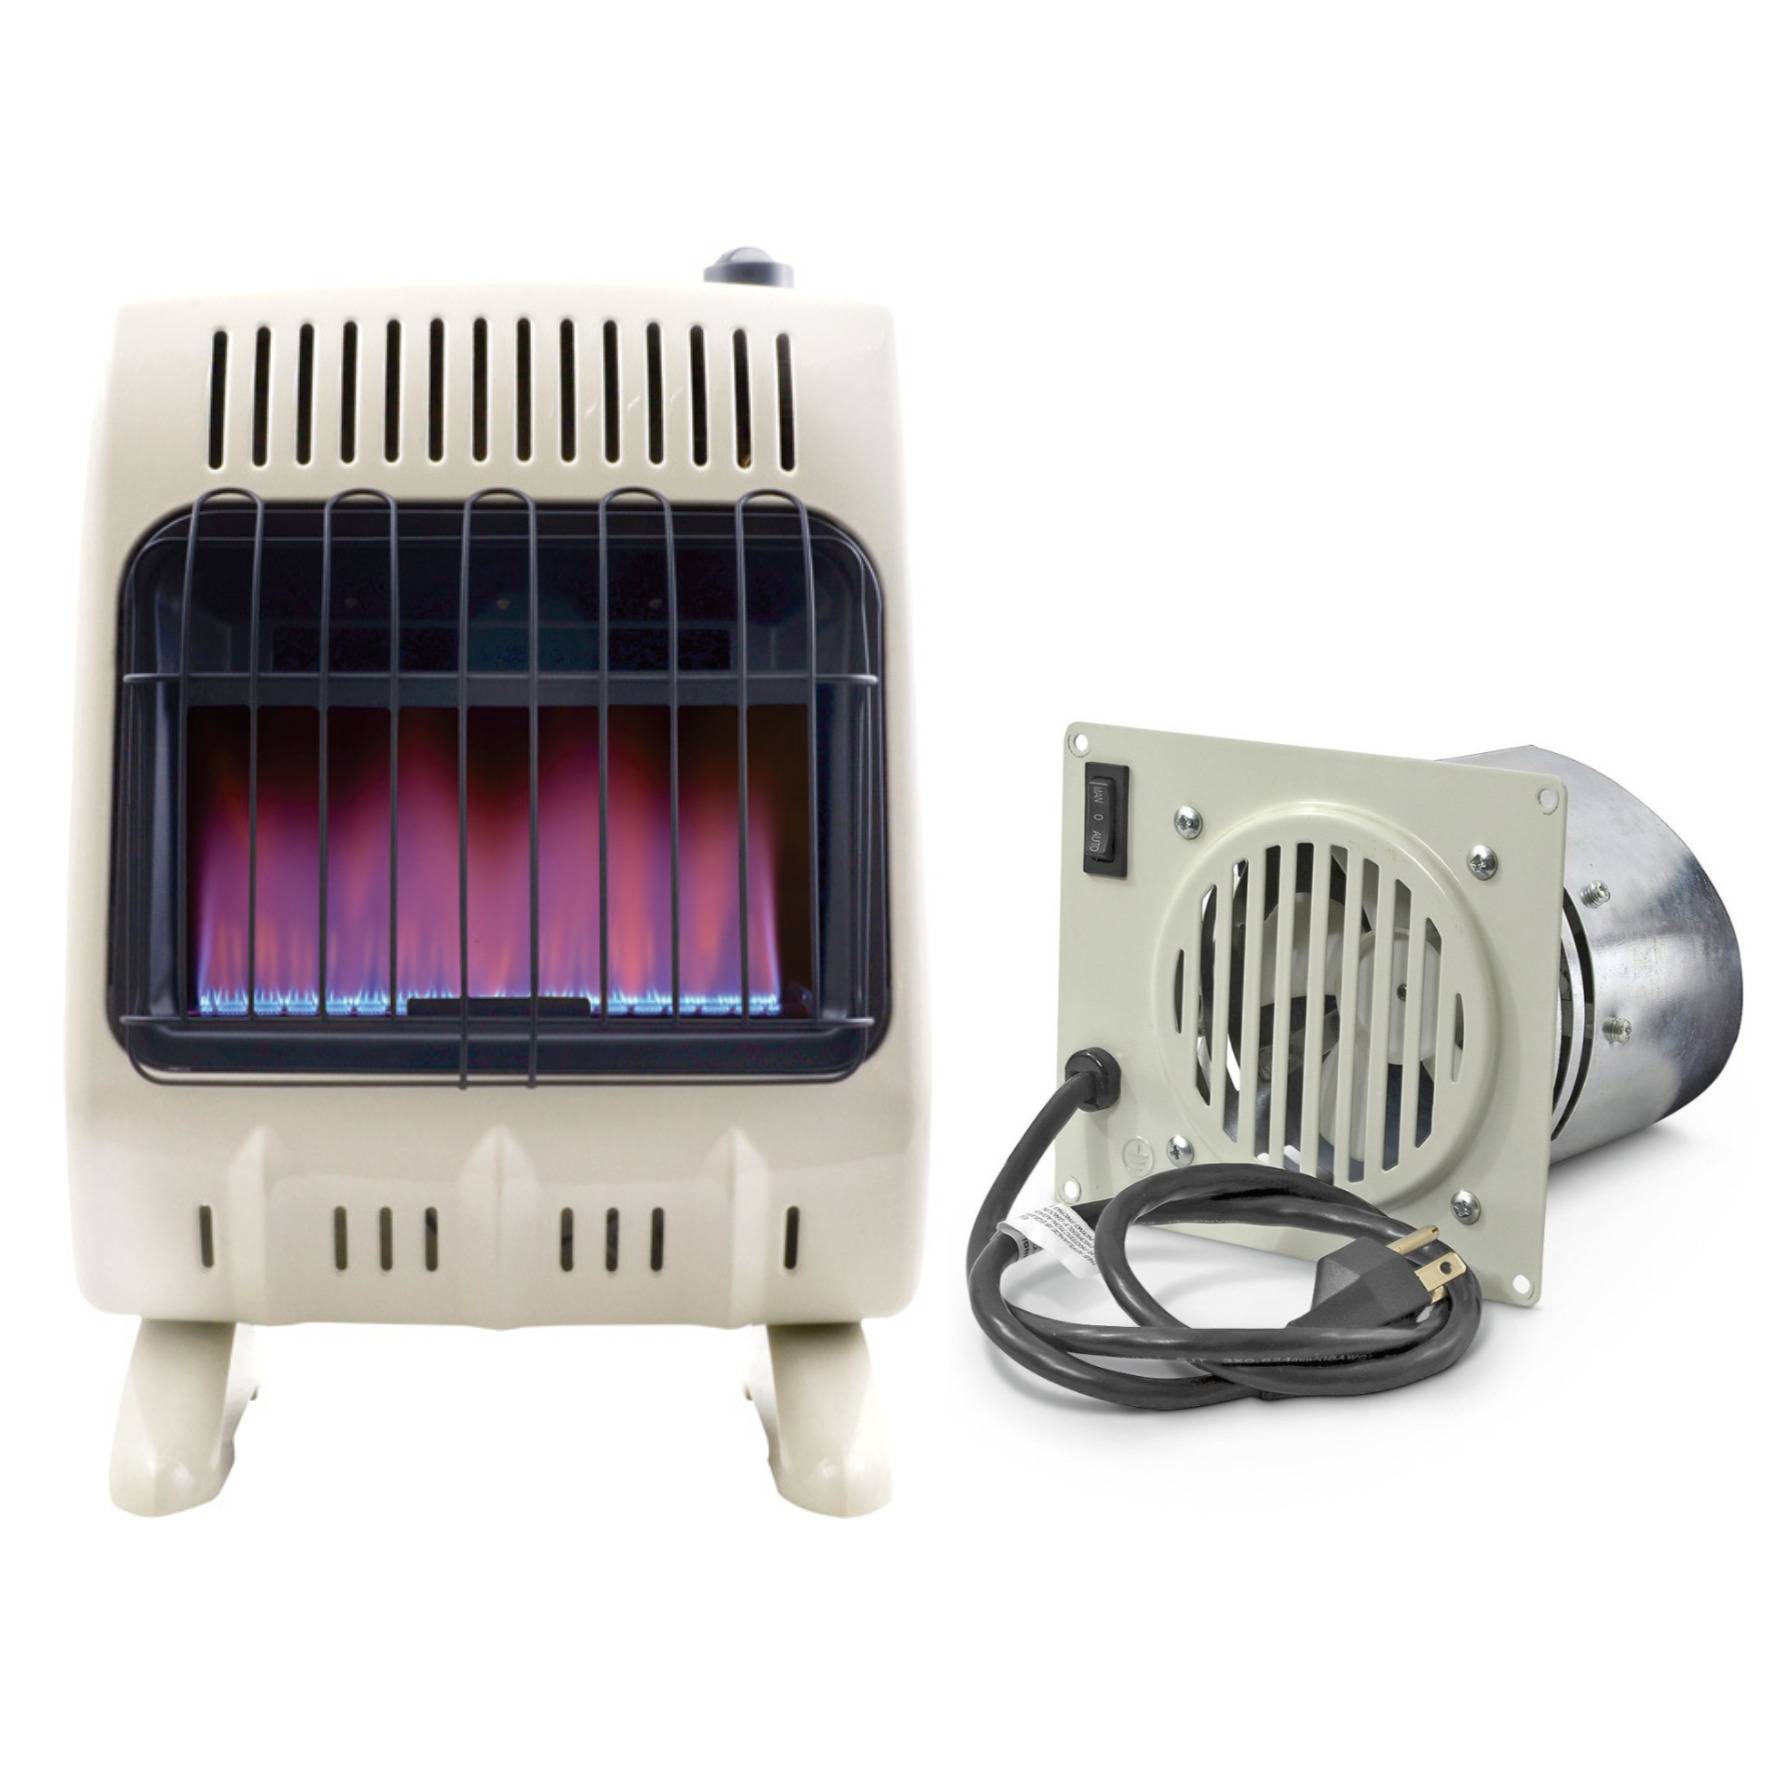 Mr. Heater Vent Free Blower Fan Kit for 20K and 30K Units and Blue Flame Natural Gas Heater